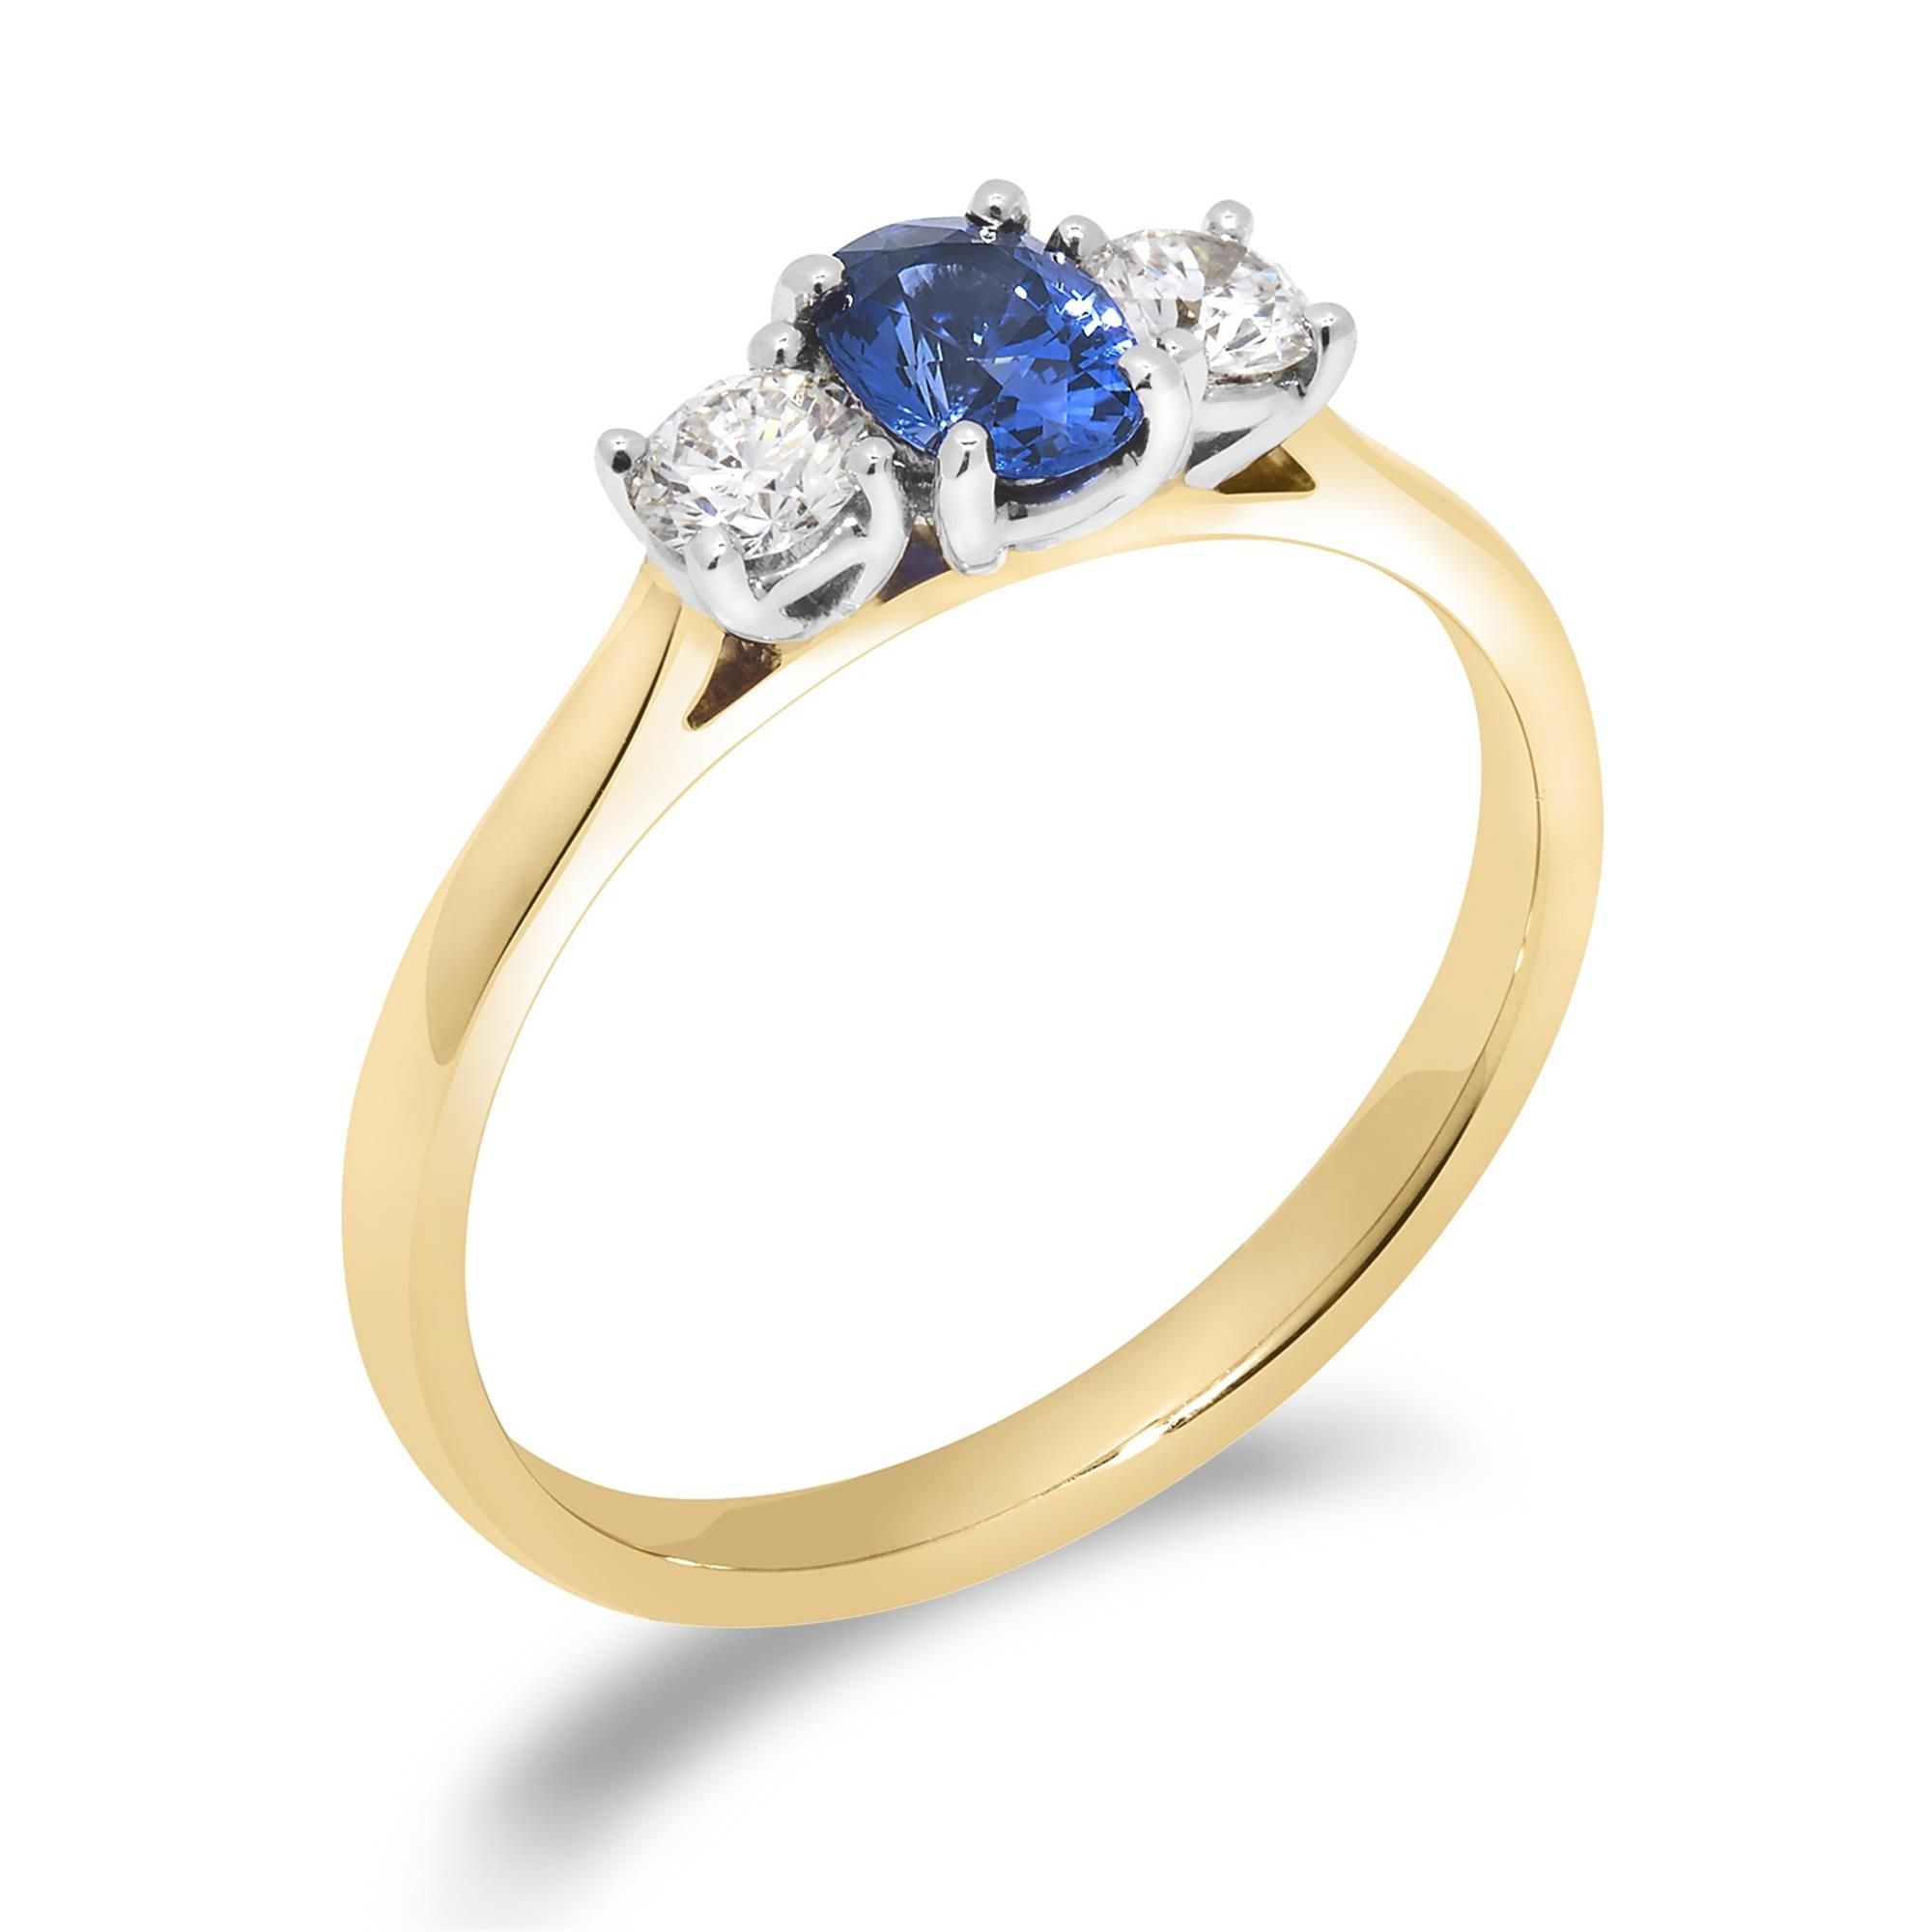 Oval Sapphire And Diamond Ring | Pravins With Regard To Oval Sapphire And Diamond Trinity Rings (View 23 of 25)